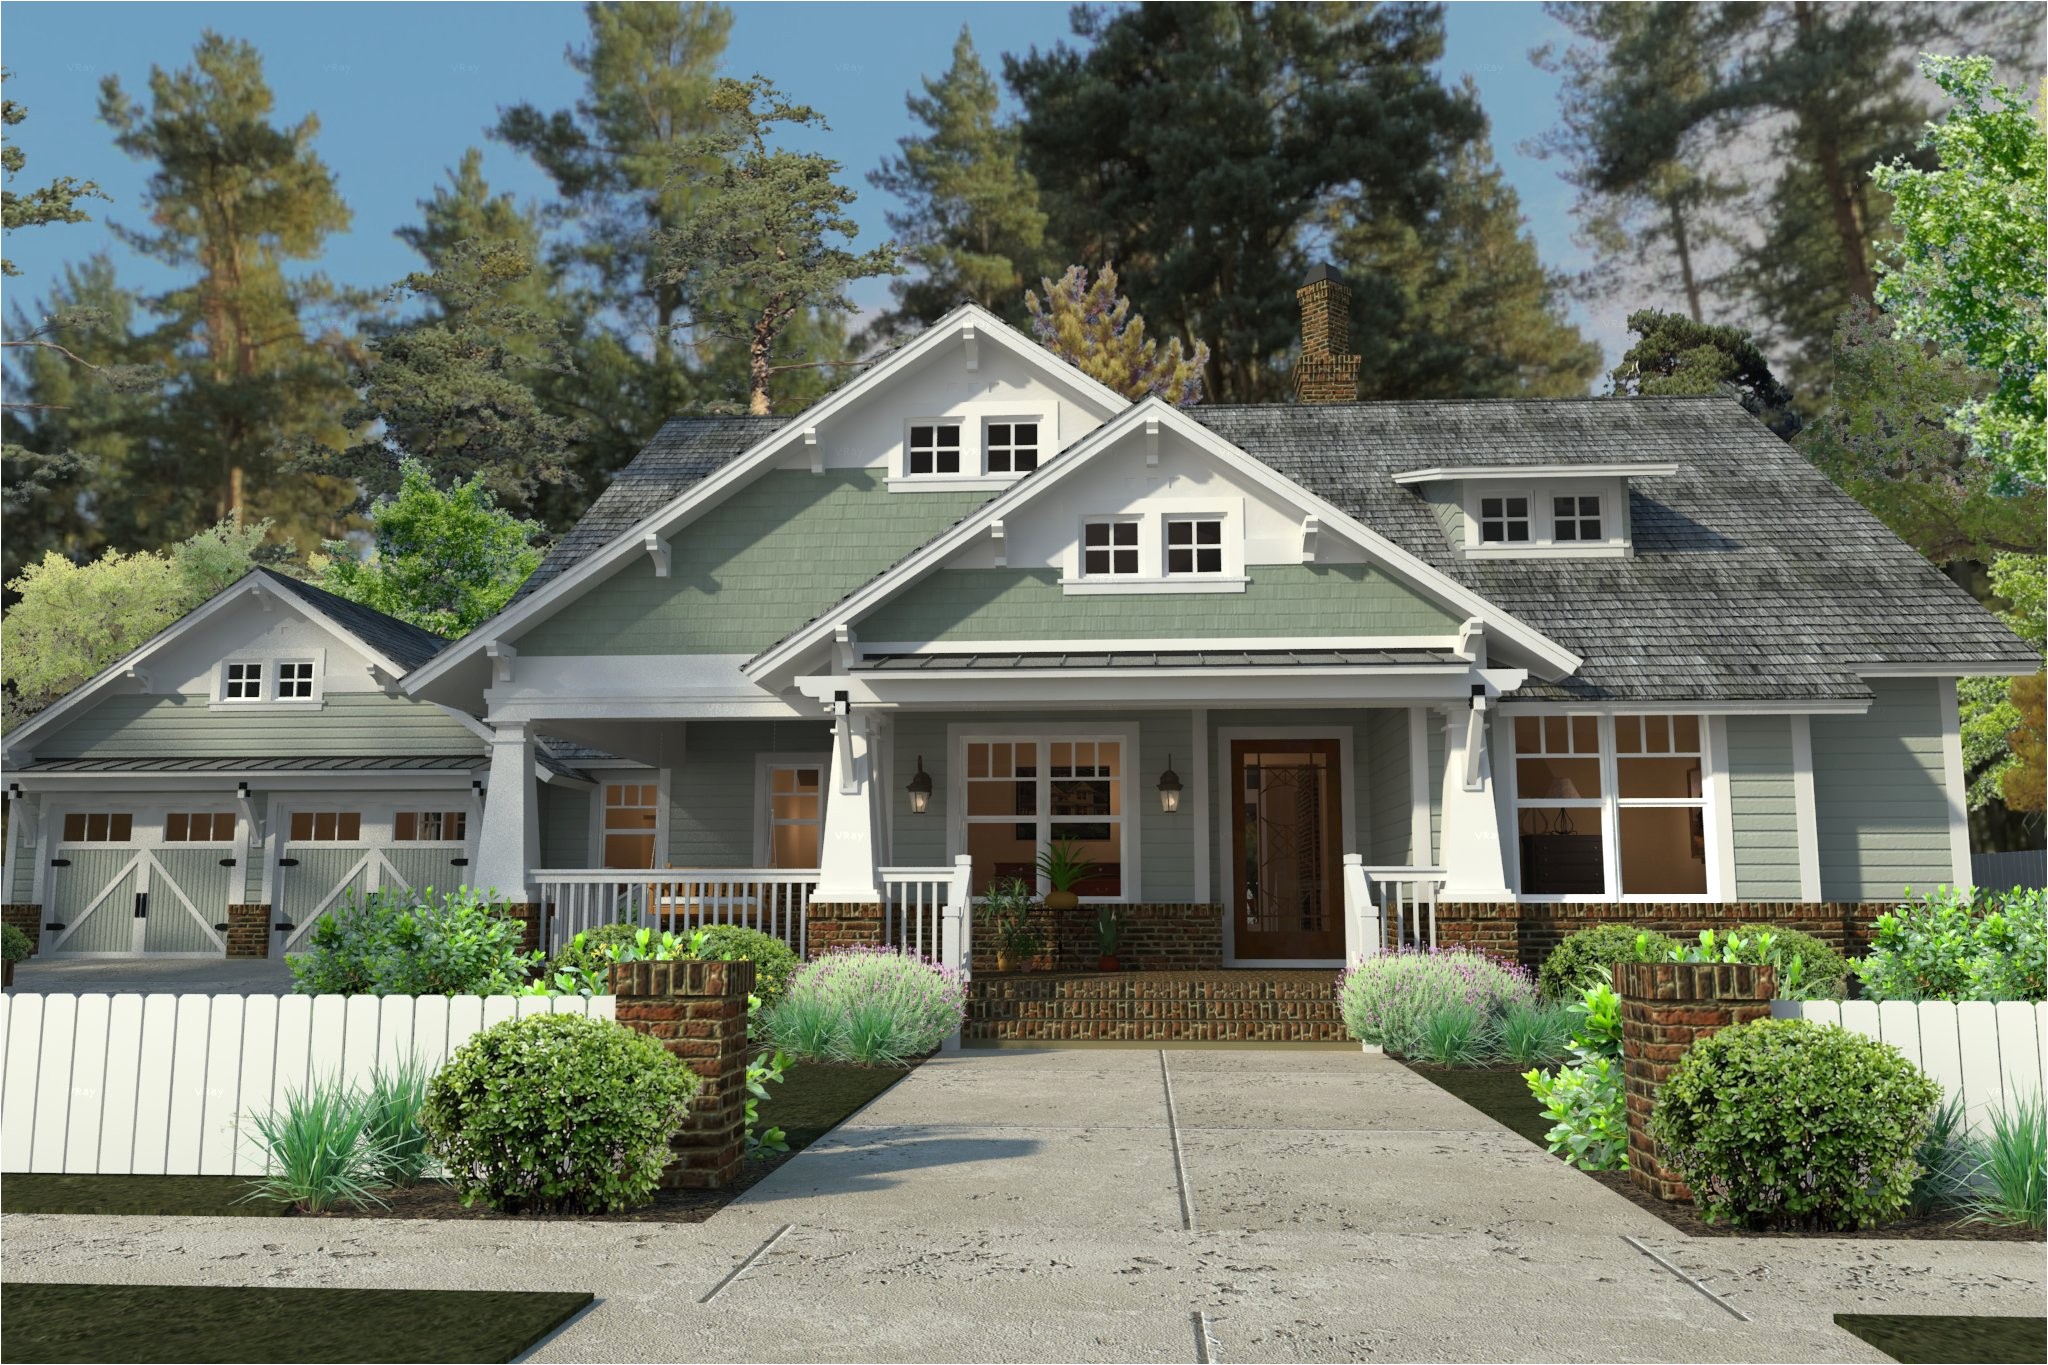 2 story craftsman style home plans awesome 2 story craftsman house plans luxamcc